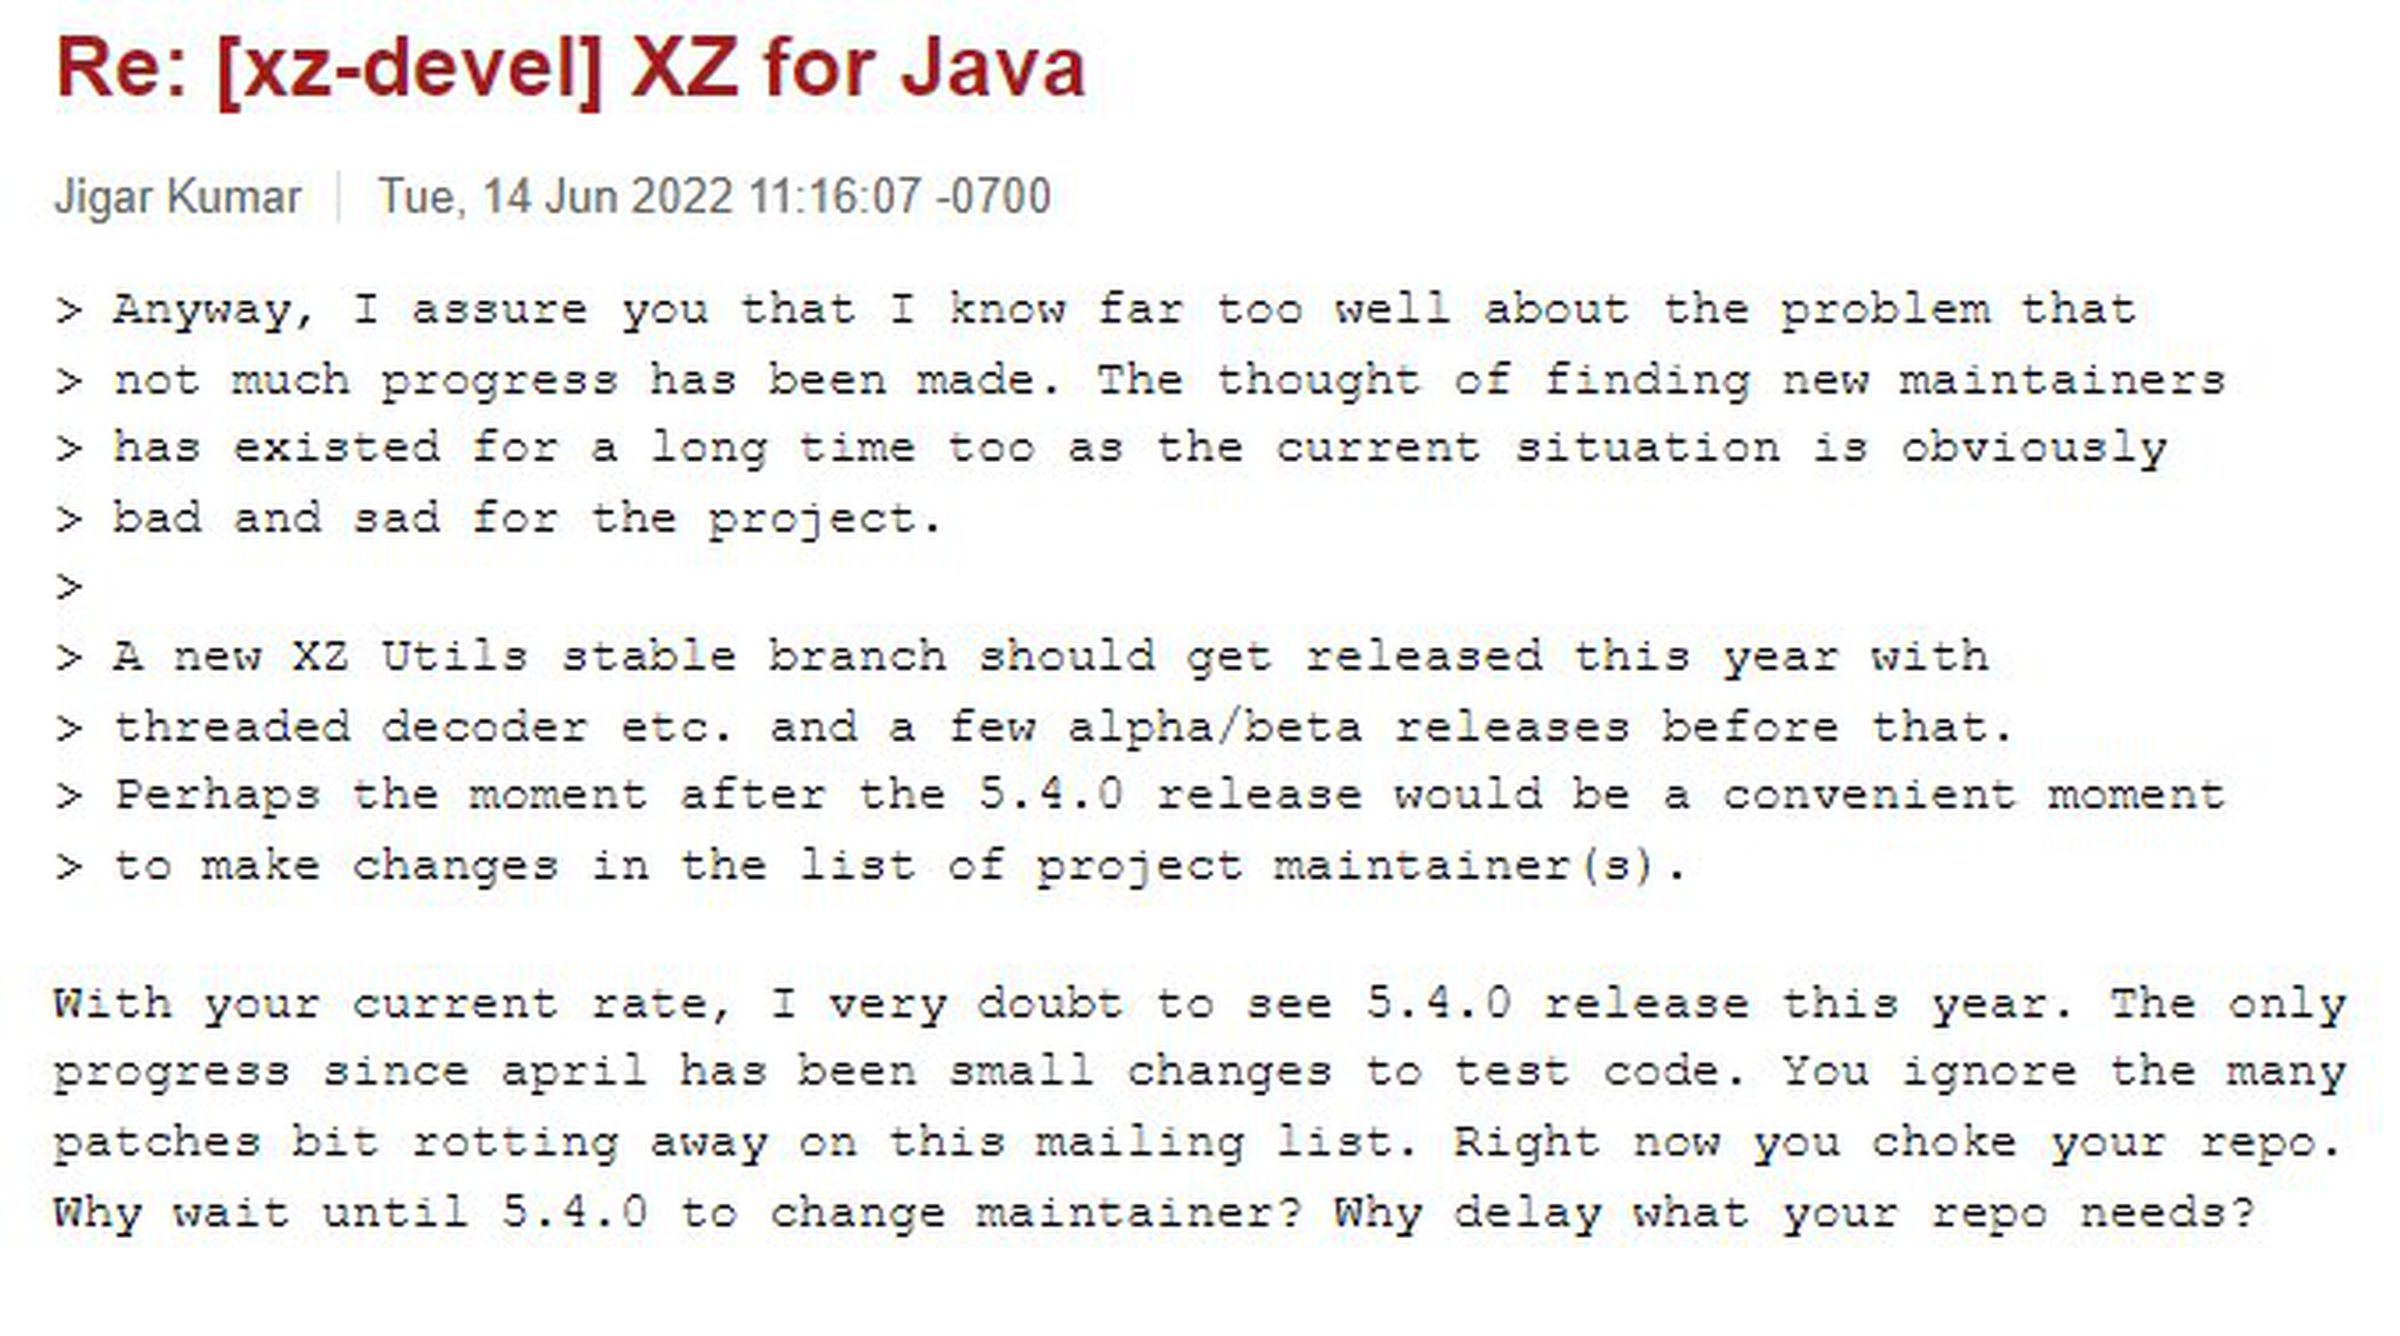 “With your current rate, I very doubt to see 5.4.0 release this year. The only progress since april has been small changes to test code. You ignore the many patches bit rotting away on this mailing list. Right now you choke your repo. Why wait until 5.4.0 to change maintainer? Why delay what your repo needs?”